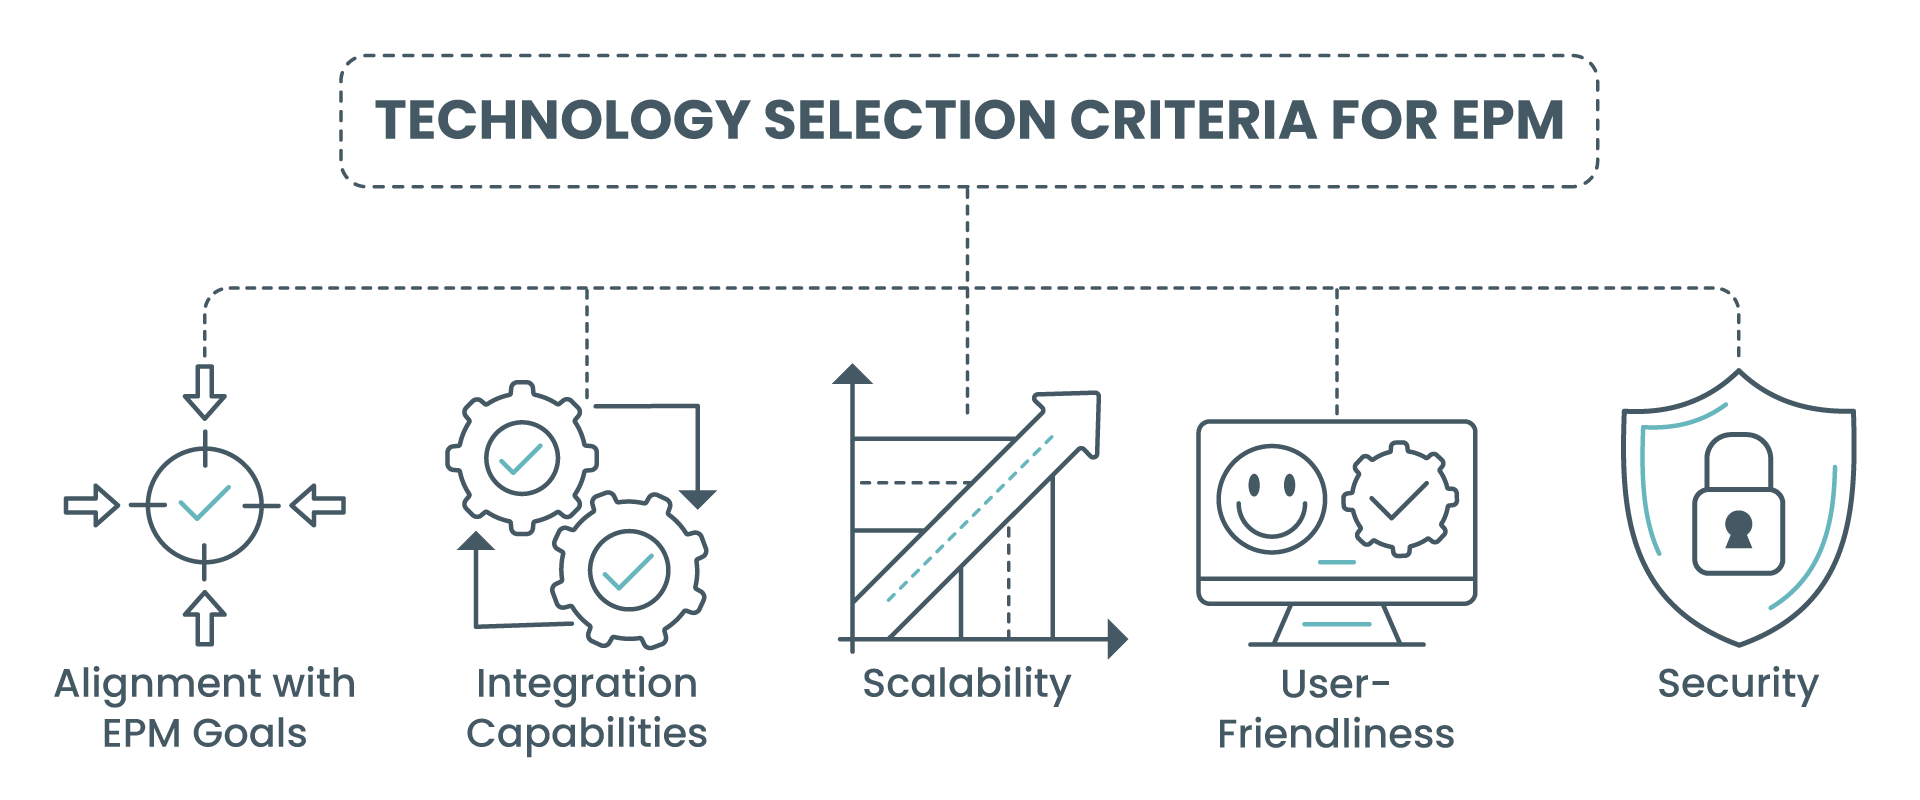 Technology Selection Criteria for EPM